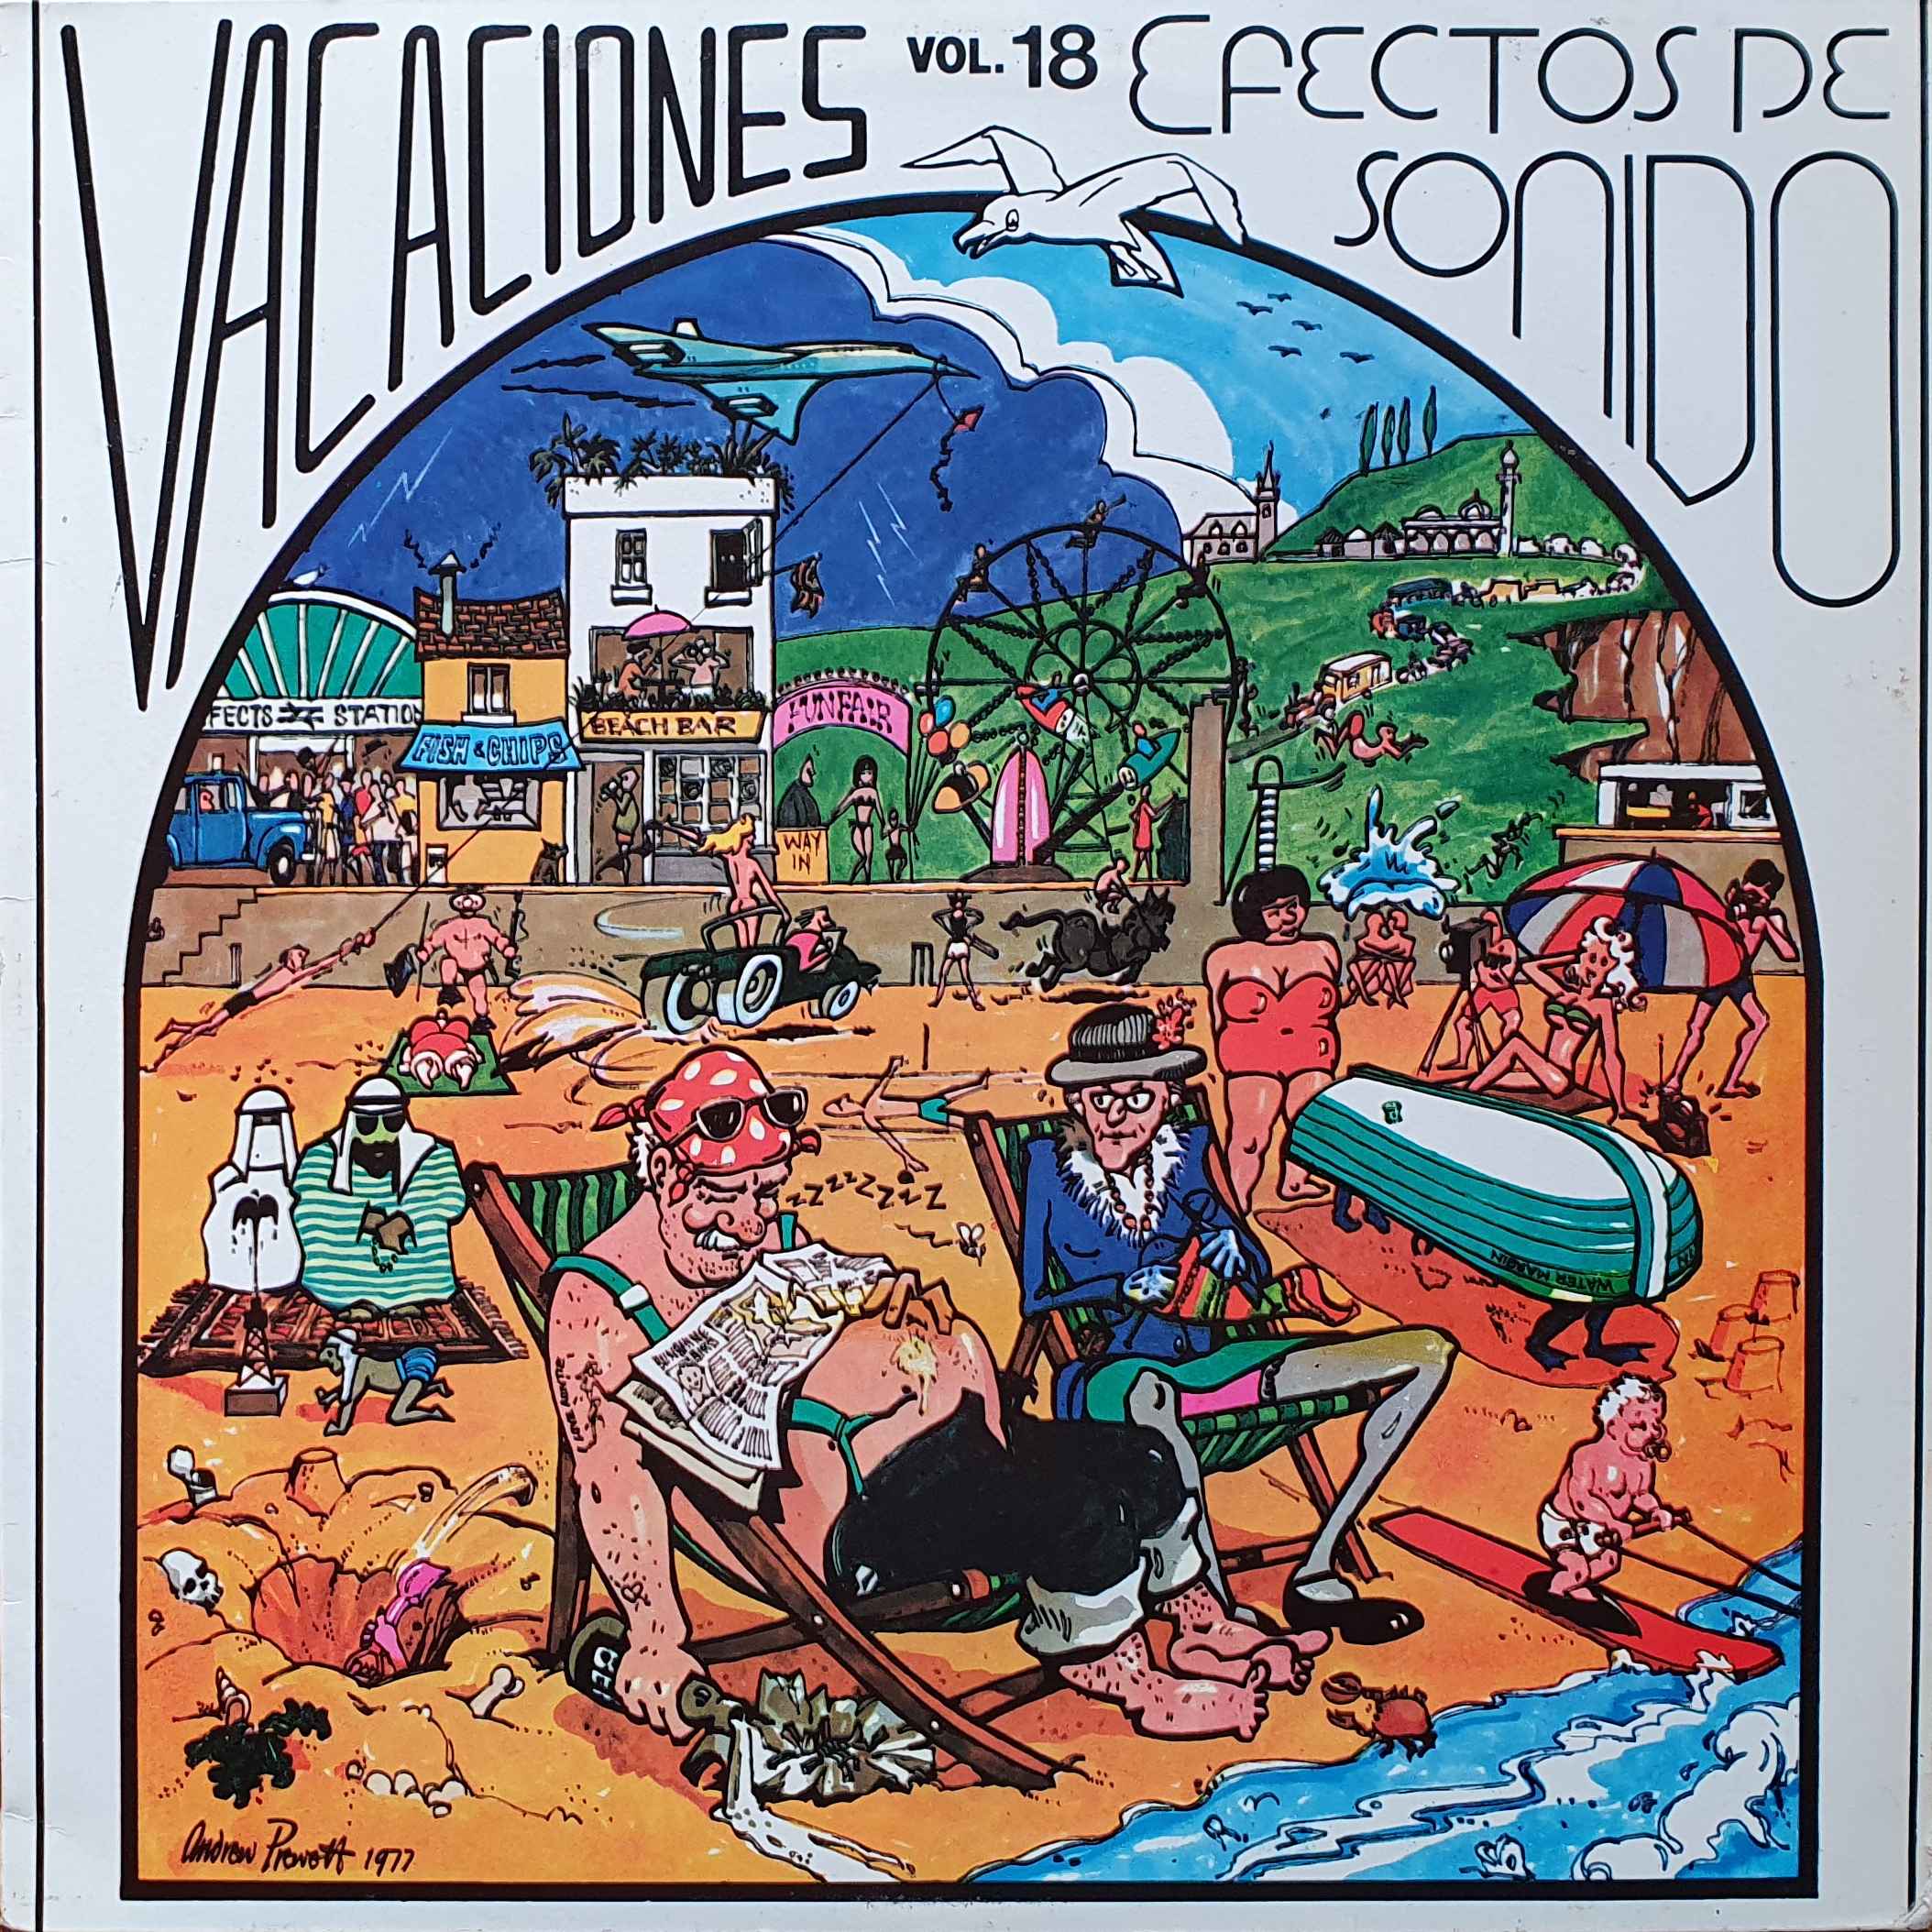 Picture of 51.0122 Efectos de sonido Vol. 18 - Vacaciones (Spanish import) by artist Various from the BBC albums - Records and Tapes library